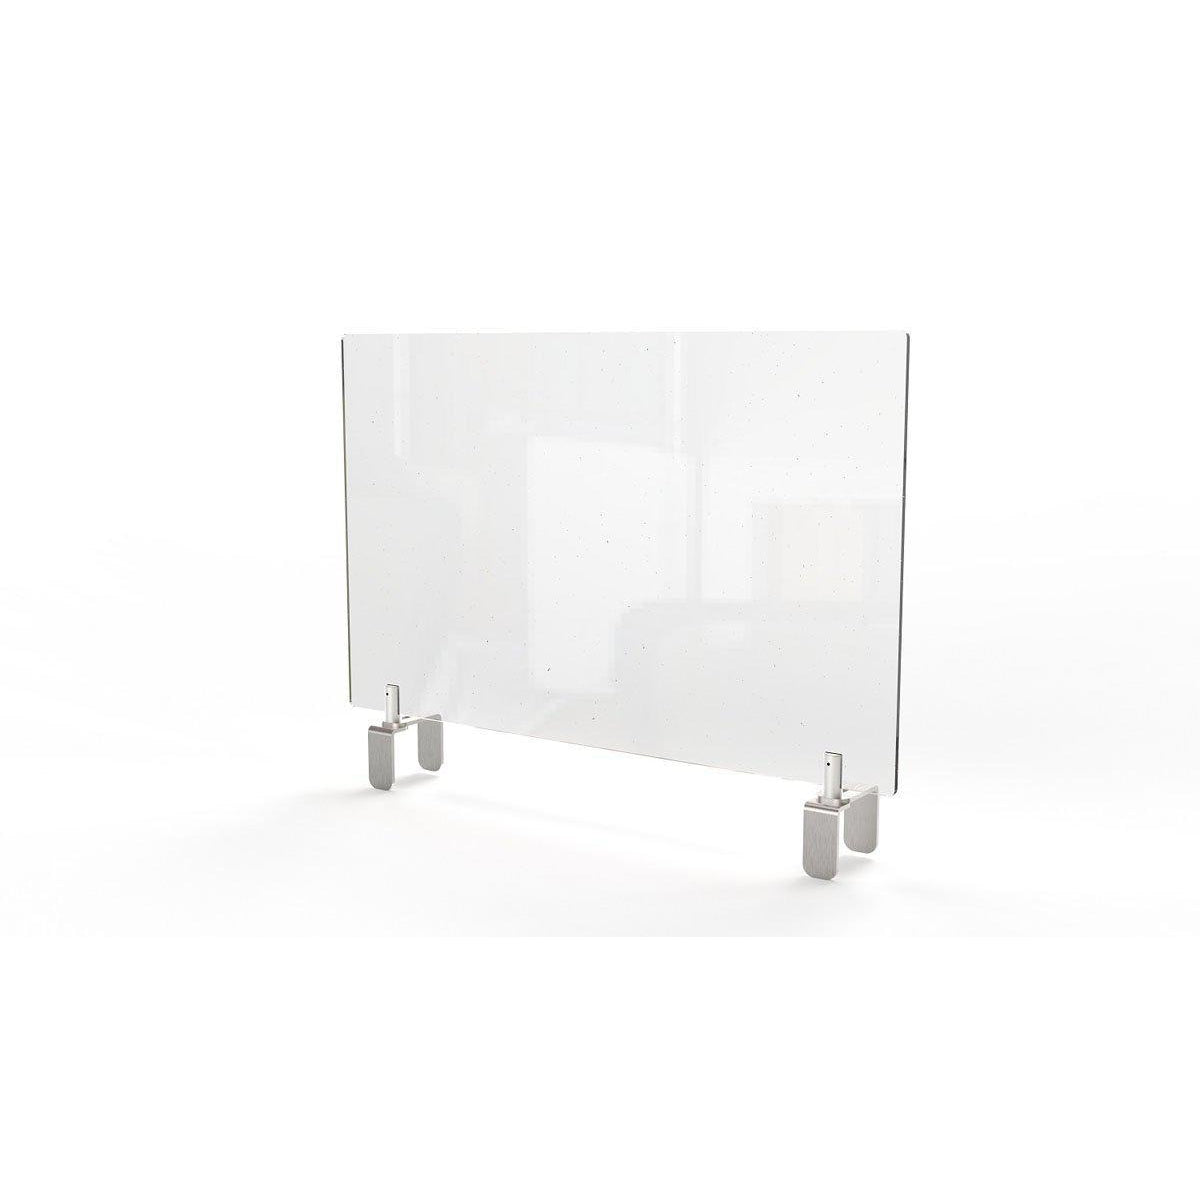 Clear Thermoplastic Partition & Cubicle Extender with Adjustable Clamp Attachment, 18"H x 24"W